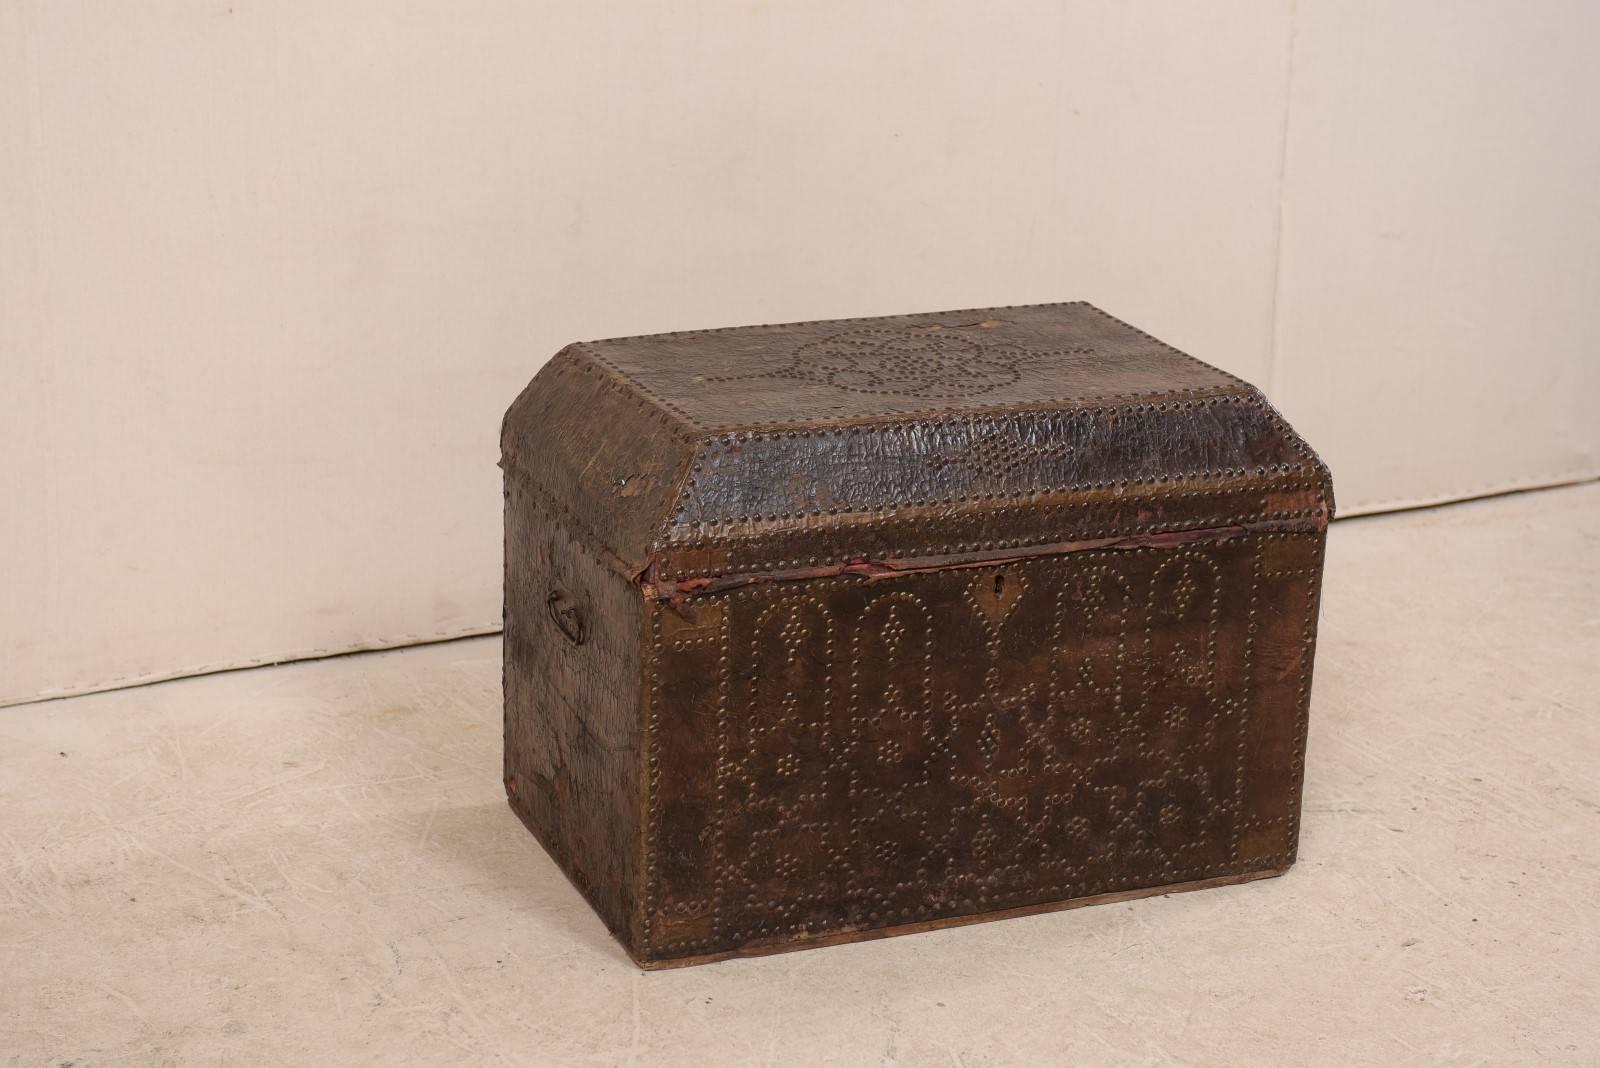 A 19th century Spanish colonial leather covered trunk. This antique Spanish coffer features a rectangular-domed top and is ornately decorated with brass studs, with special attention and patterned detail at the front and top. Some areas of leather